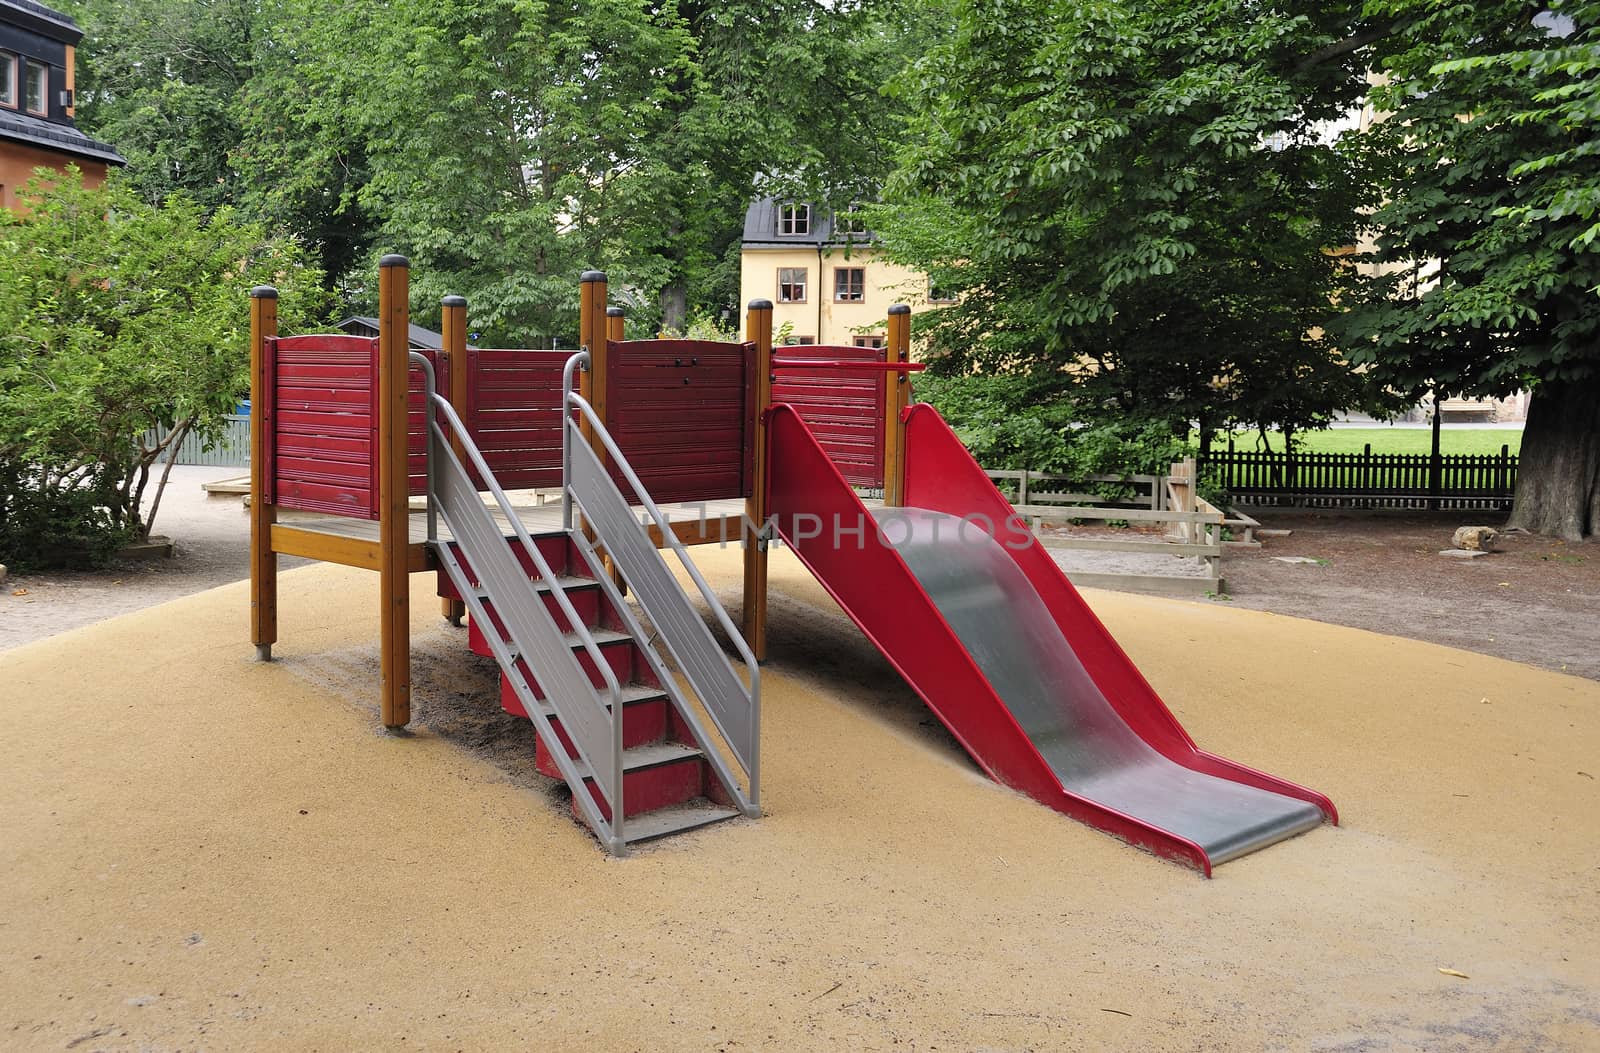 Playground by a40757